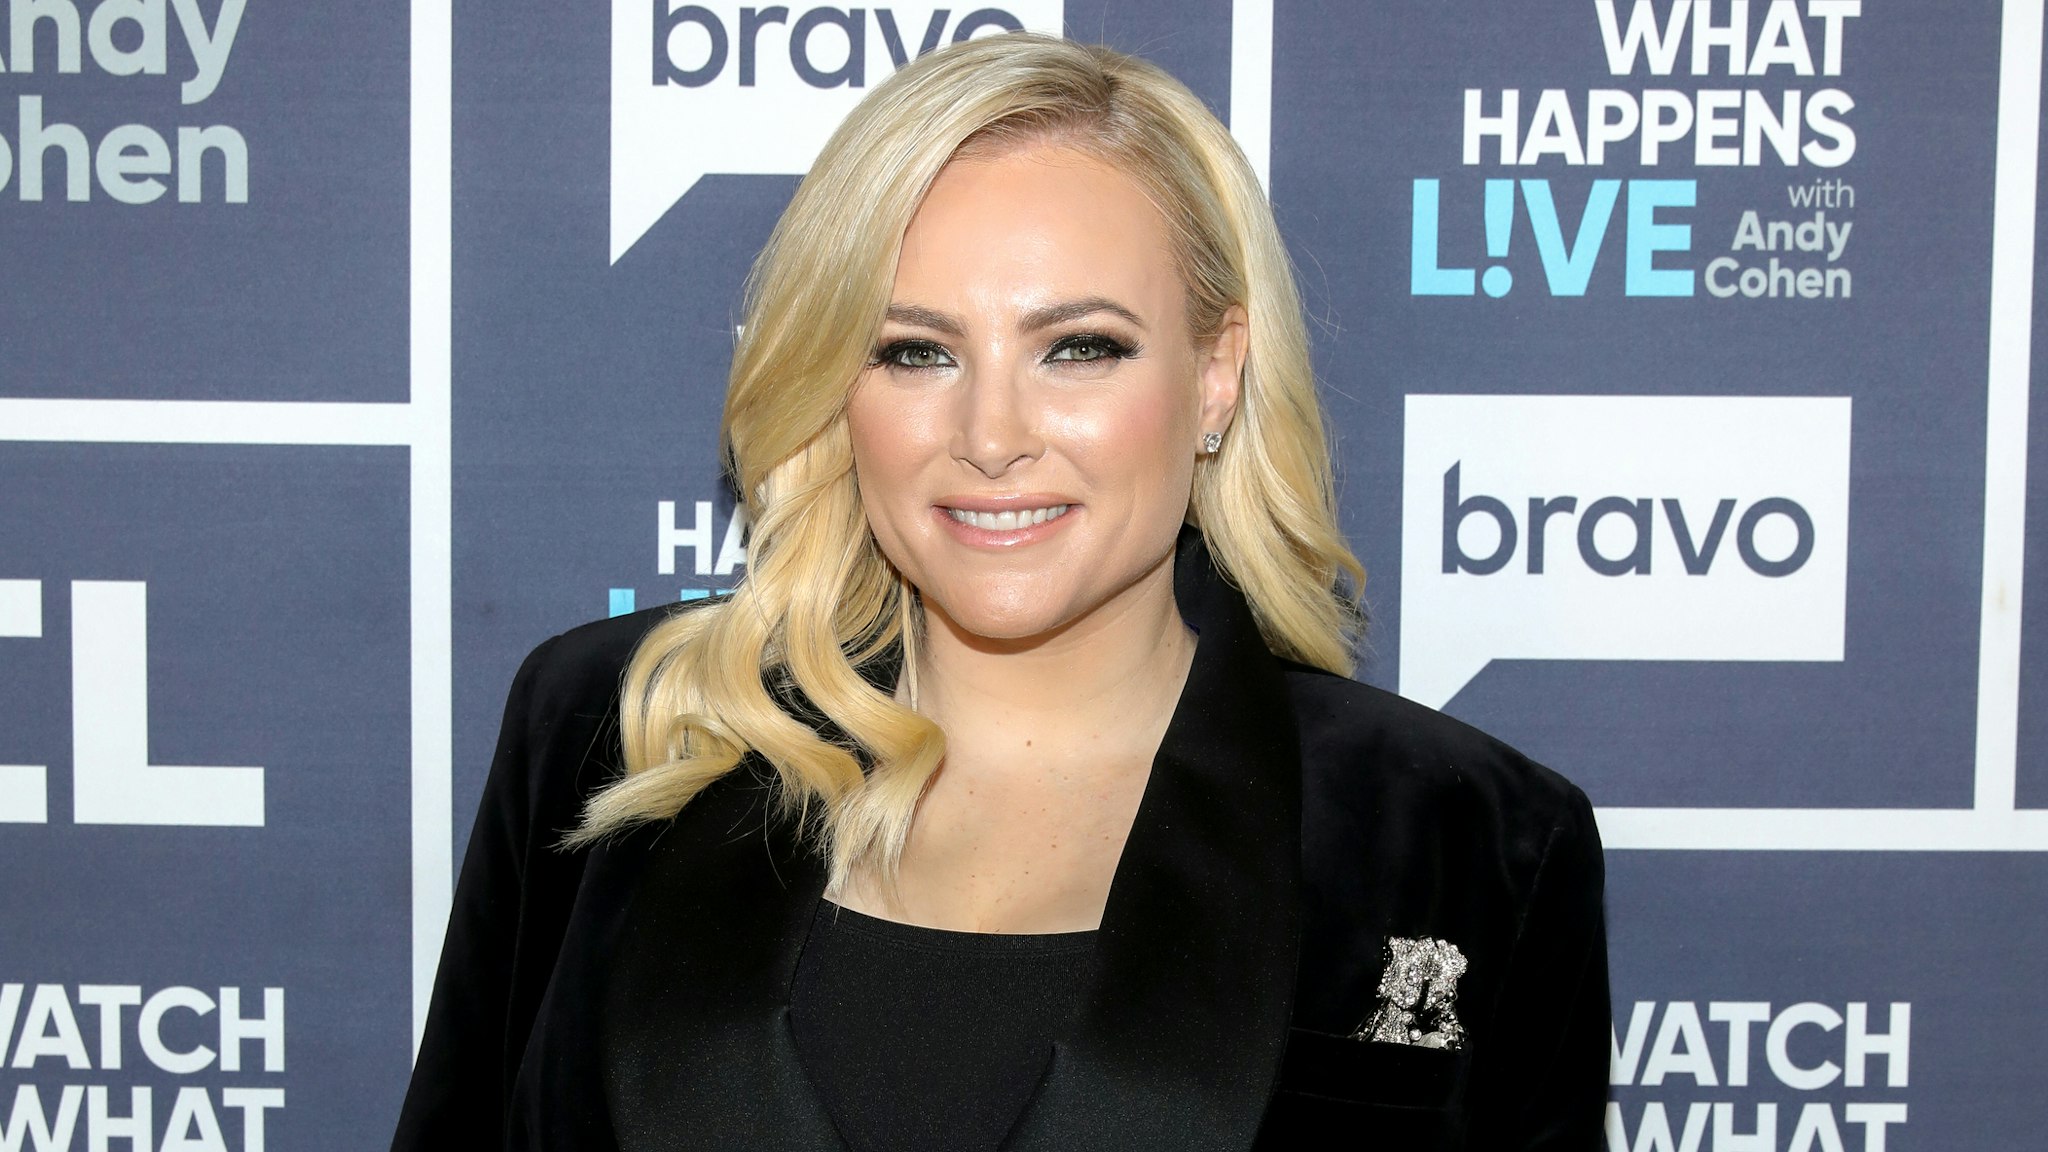 WATCH WHAT HAPPENS LIVE WITH ANDY COHEN -- Episode 17018 -- Pictured: Meghan McCain --